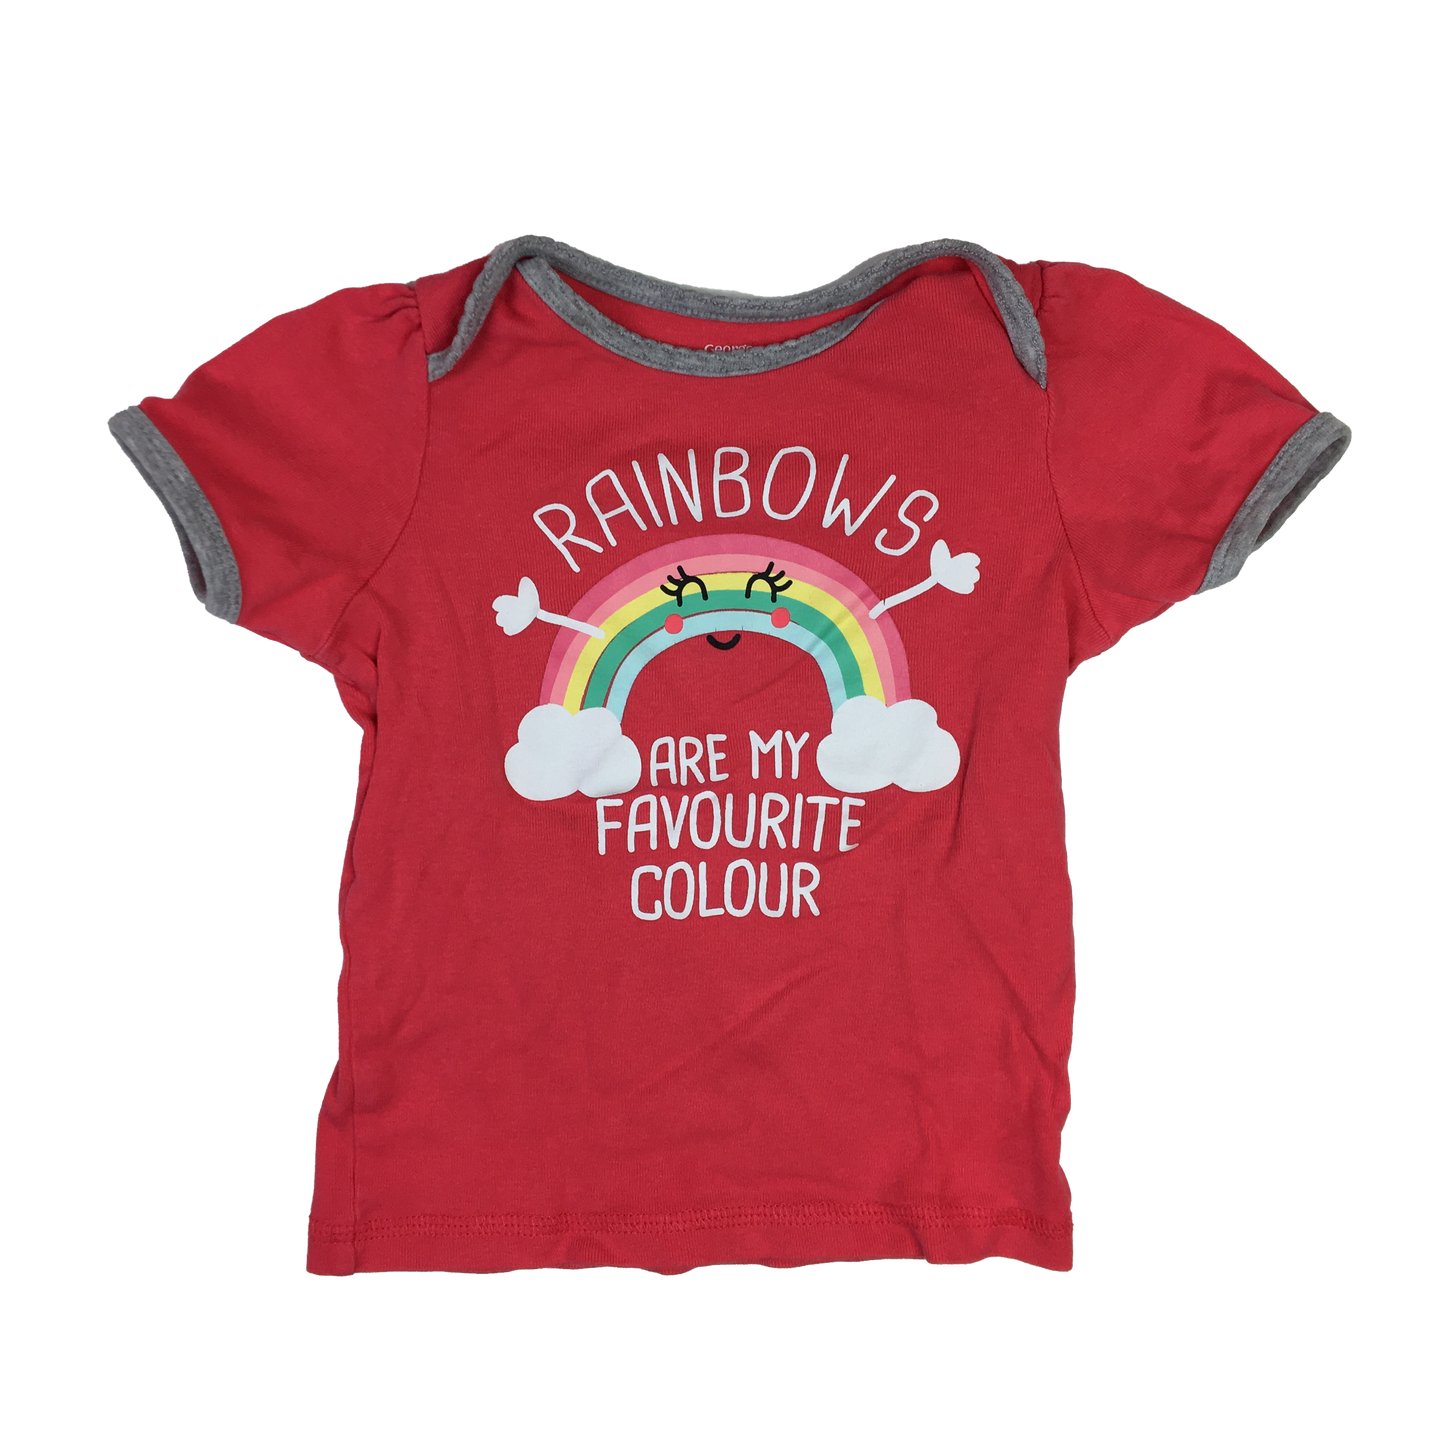 George Pink T-Shirt "Rainbows Are My Favourite Colour" 18-24M